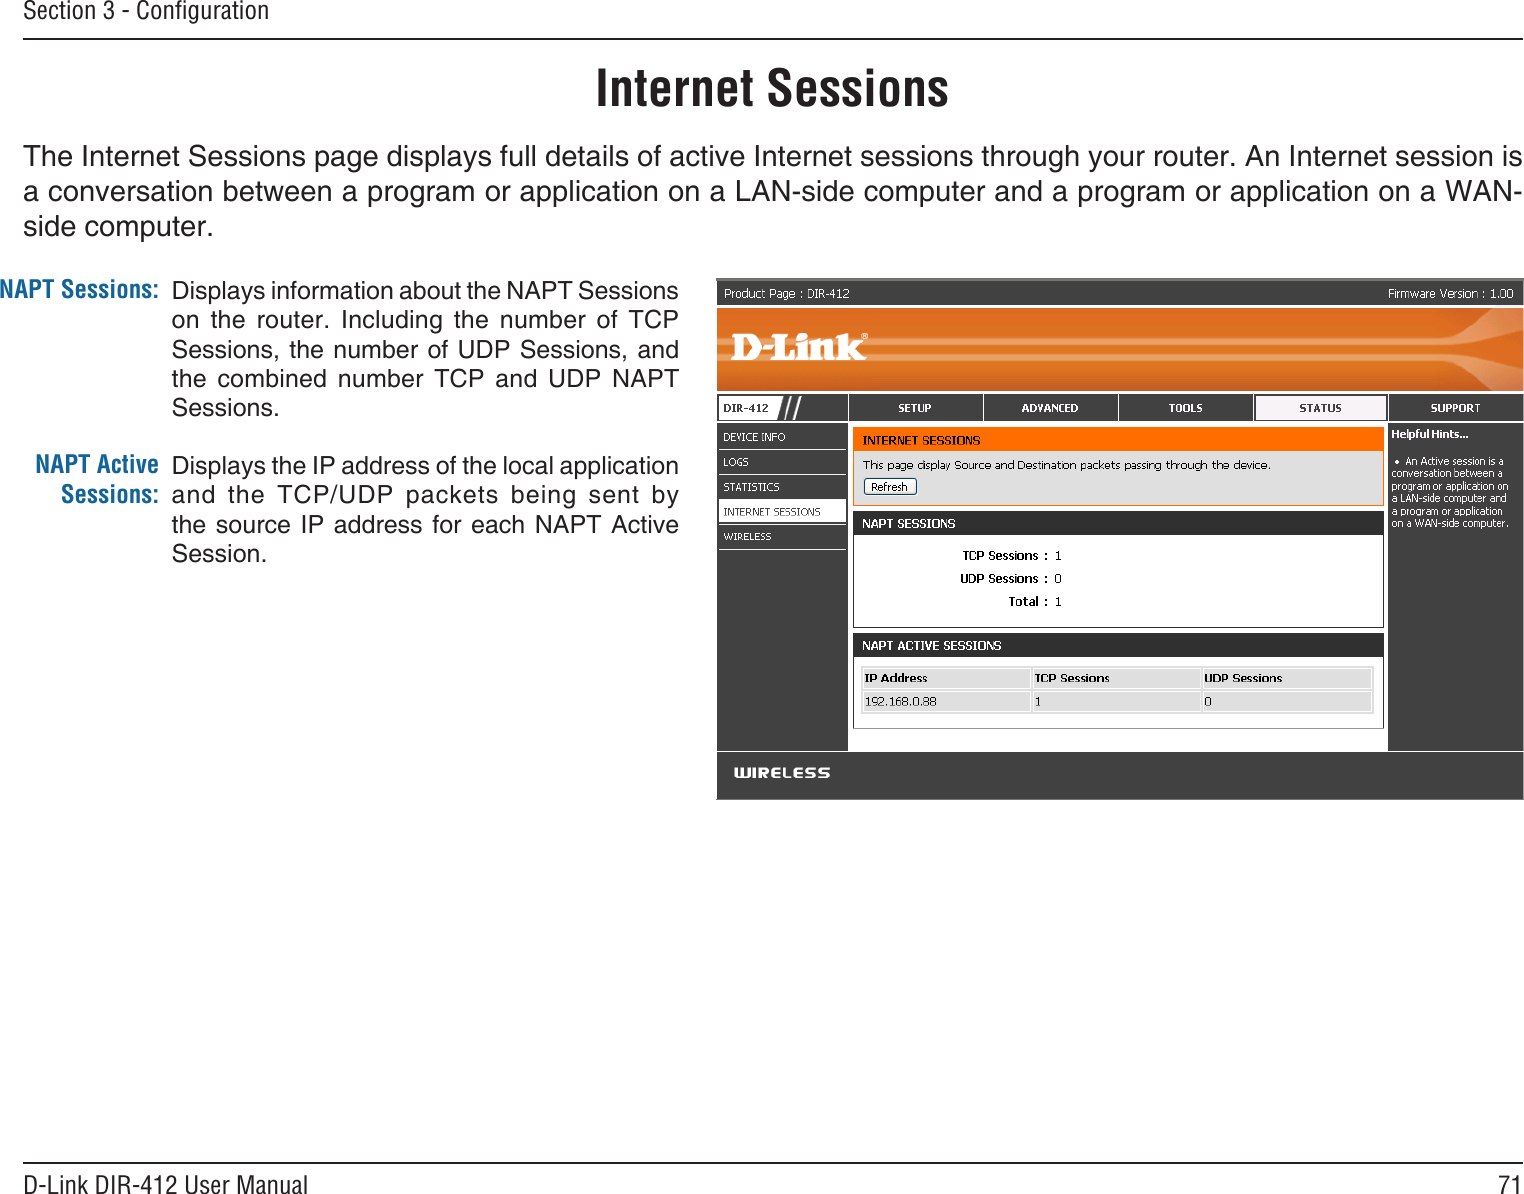 71D-Link DIR-412 User ManualSection 3 - ConﬁgurationInternet SessionsThe Internet Sessions page displays full details of active Internet sessions through your router. An Internet session is a conversation between a program or application on a LAN-side computer and a program or application on a WAN-side computer. NAPT Sessions:NAPT Active Sessions:Displays information about the NAPT Sessions on  the  router.  Including  the  number  of  TCP Sessions, the number of UDP Sessions, and the  combined  number  TCP  and  UDP  NAPT Sessions.Displays the IP address of the local application and  the  TCP/UDP  packets  being  sent  by the source IP address  for  each NAPT Active Session.